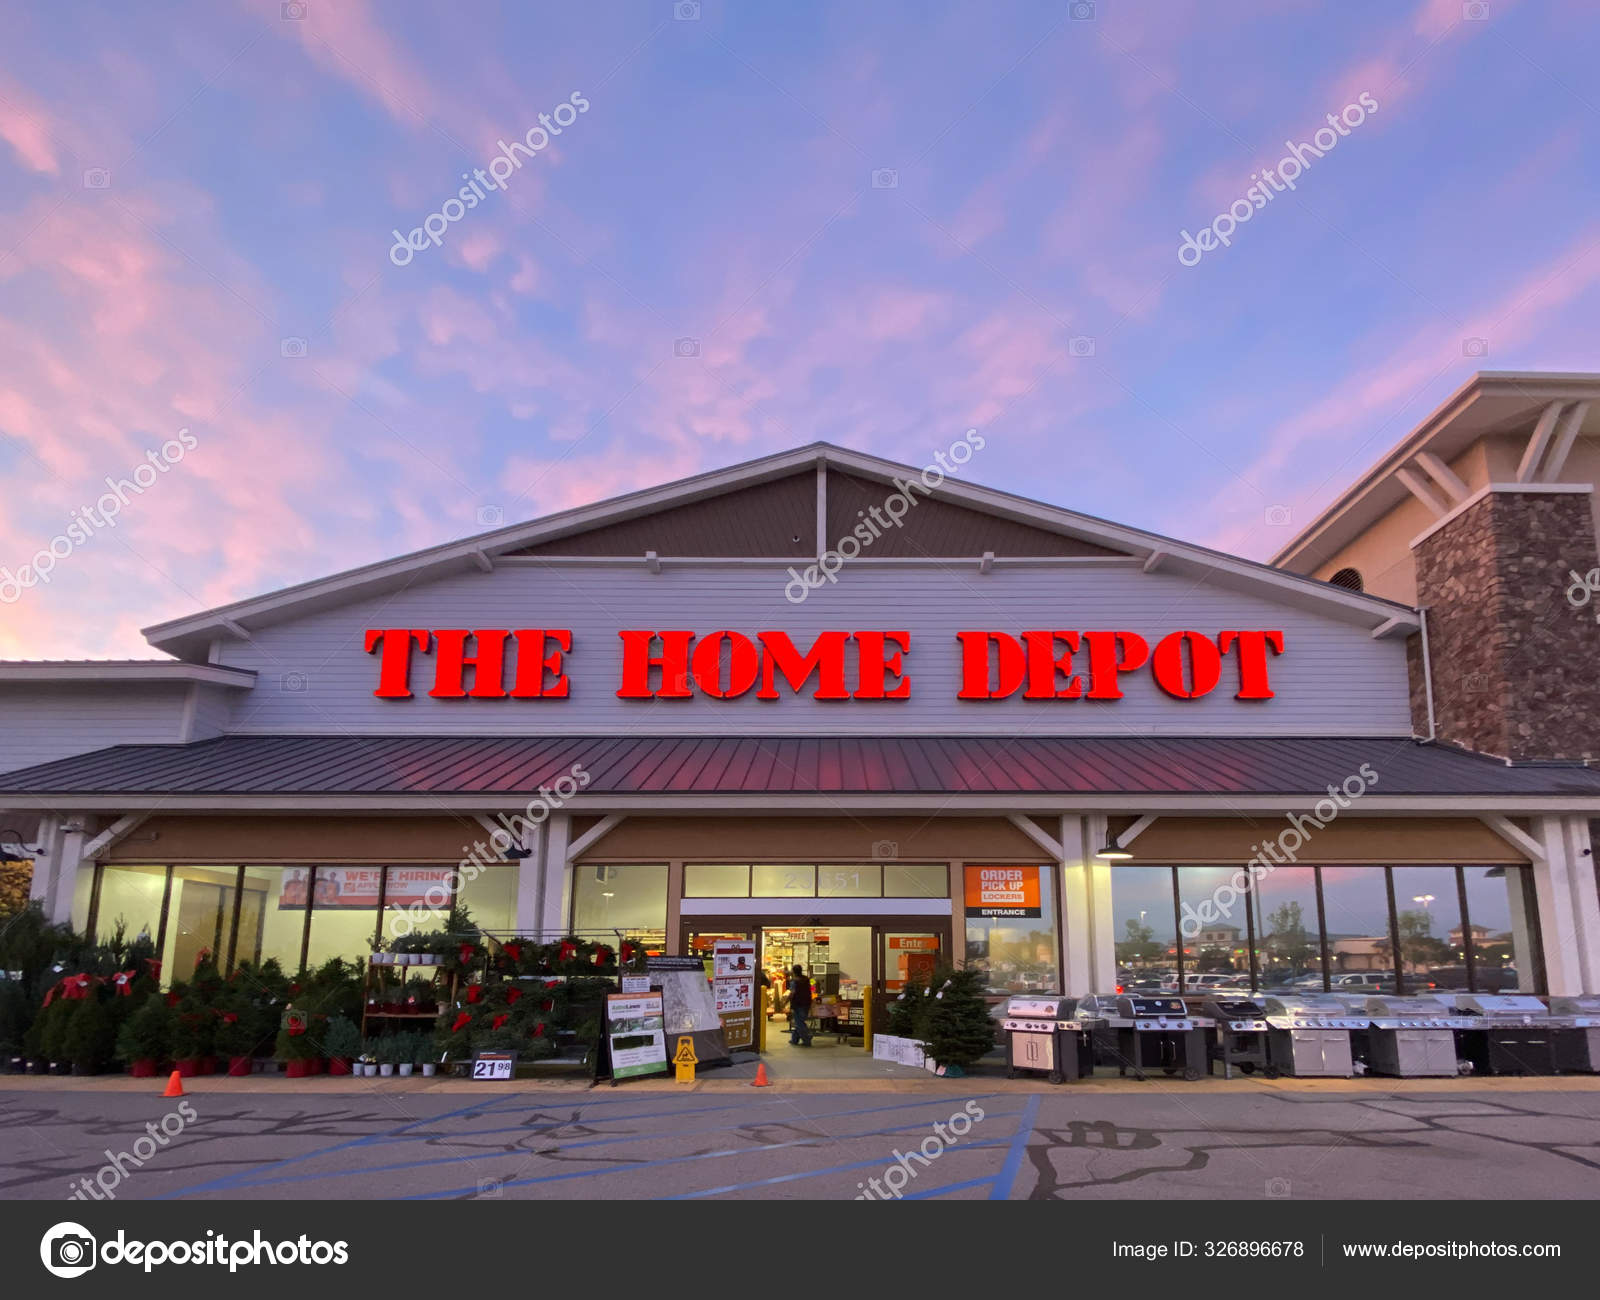 The Home Depot store entrance with colorful sunset in the